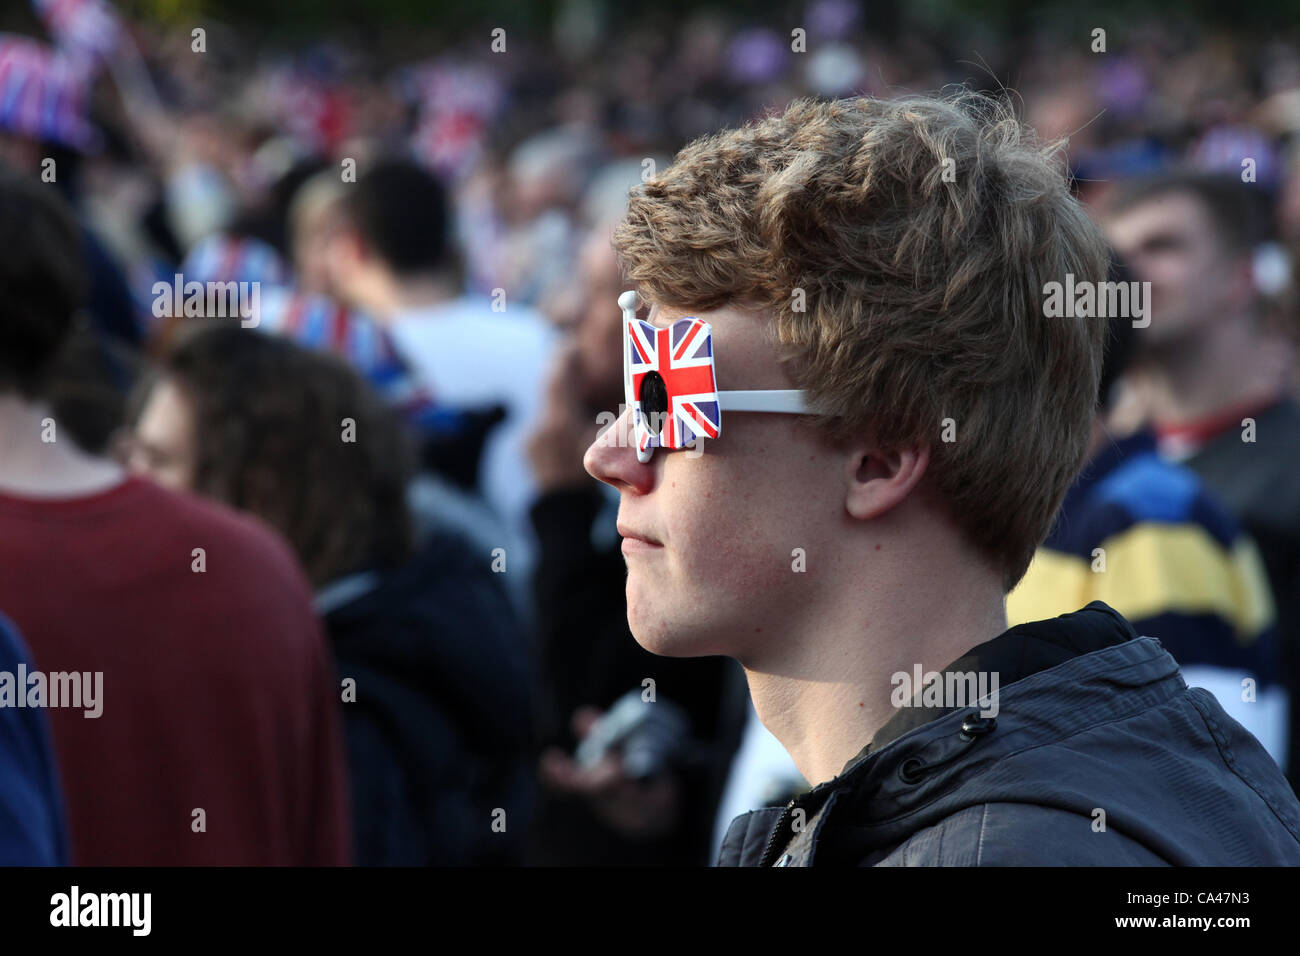 London, UK. June 4, 2012. One fan enjoys the Concert to celebrate The Queen's Diamond Jubilee on the big screens in St. james's Park, wearing Union Jack glasses! Stock Photo